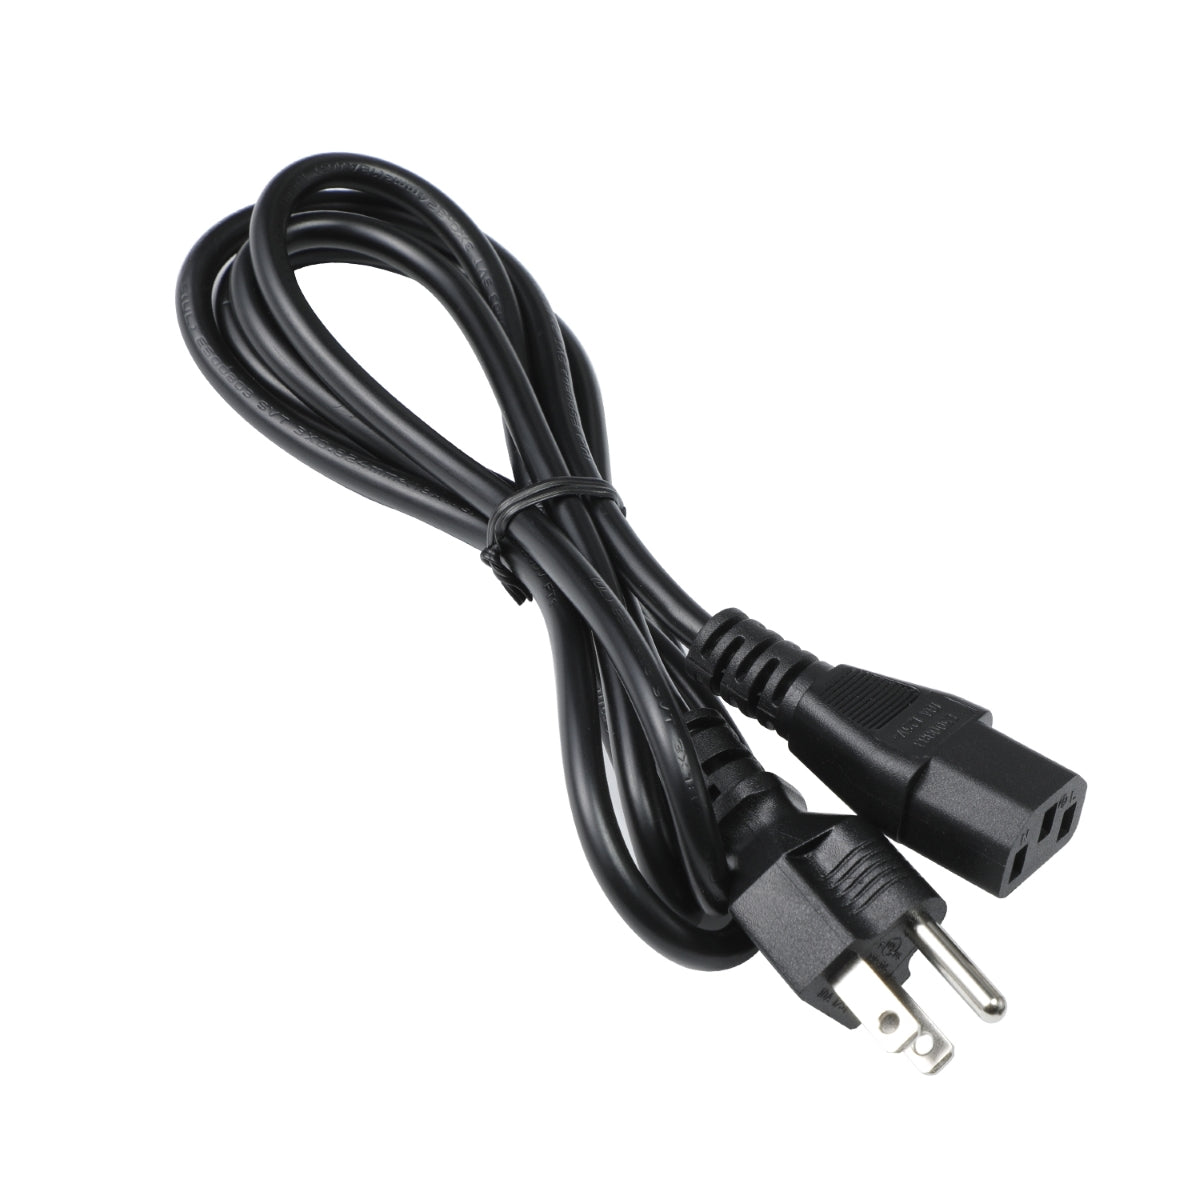 Power Cord for LG 49WL95C-WE TV Monitor Display